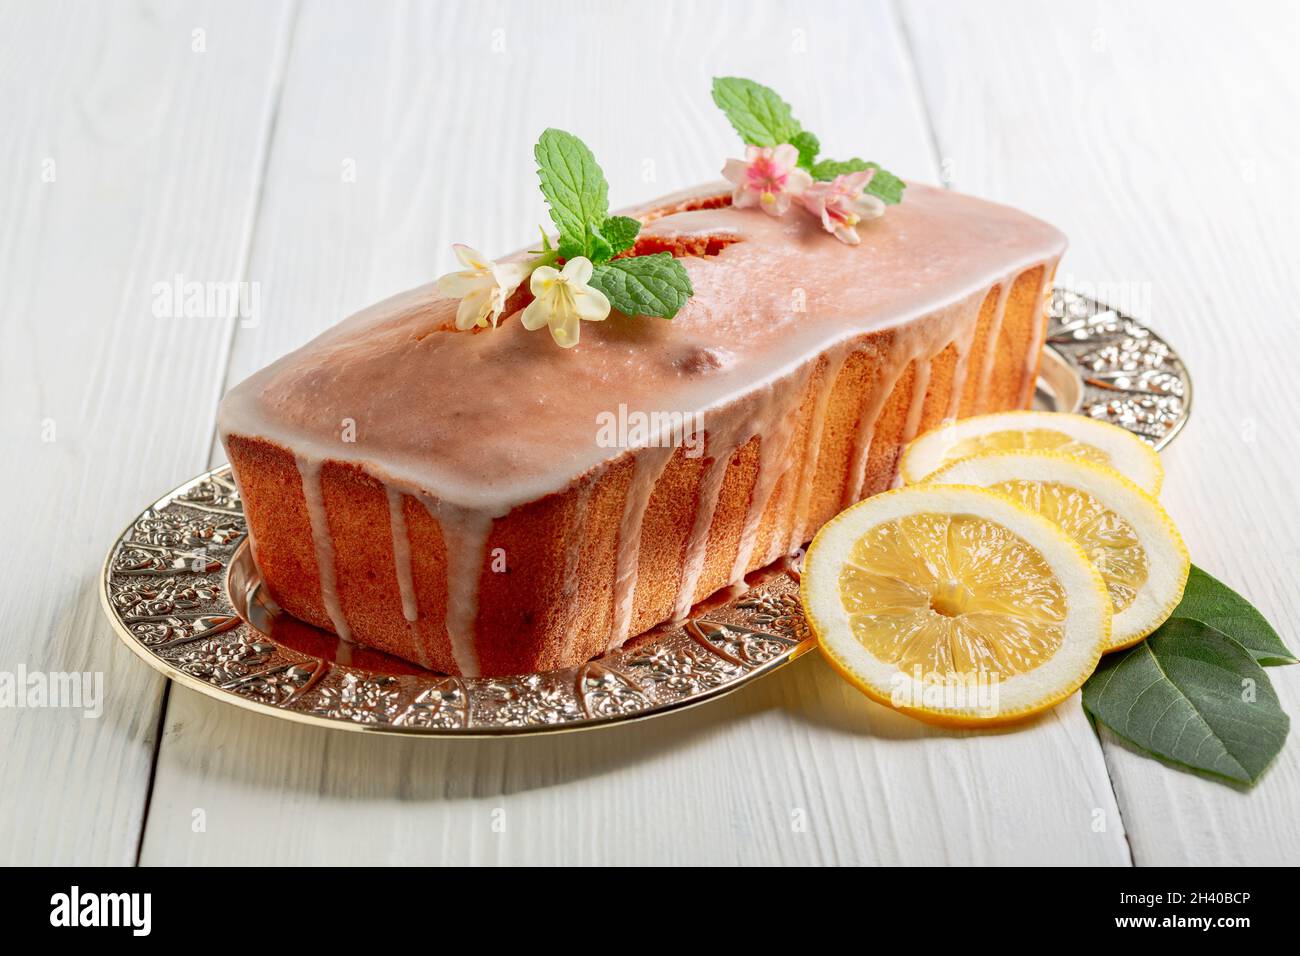 Lemon loaf cupcake with icing. Stock Photo